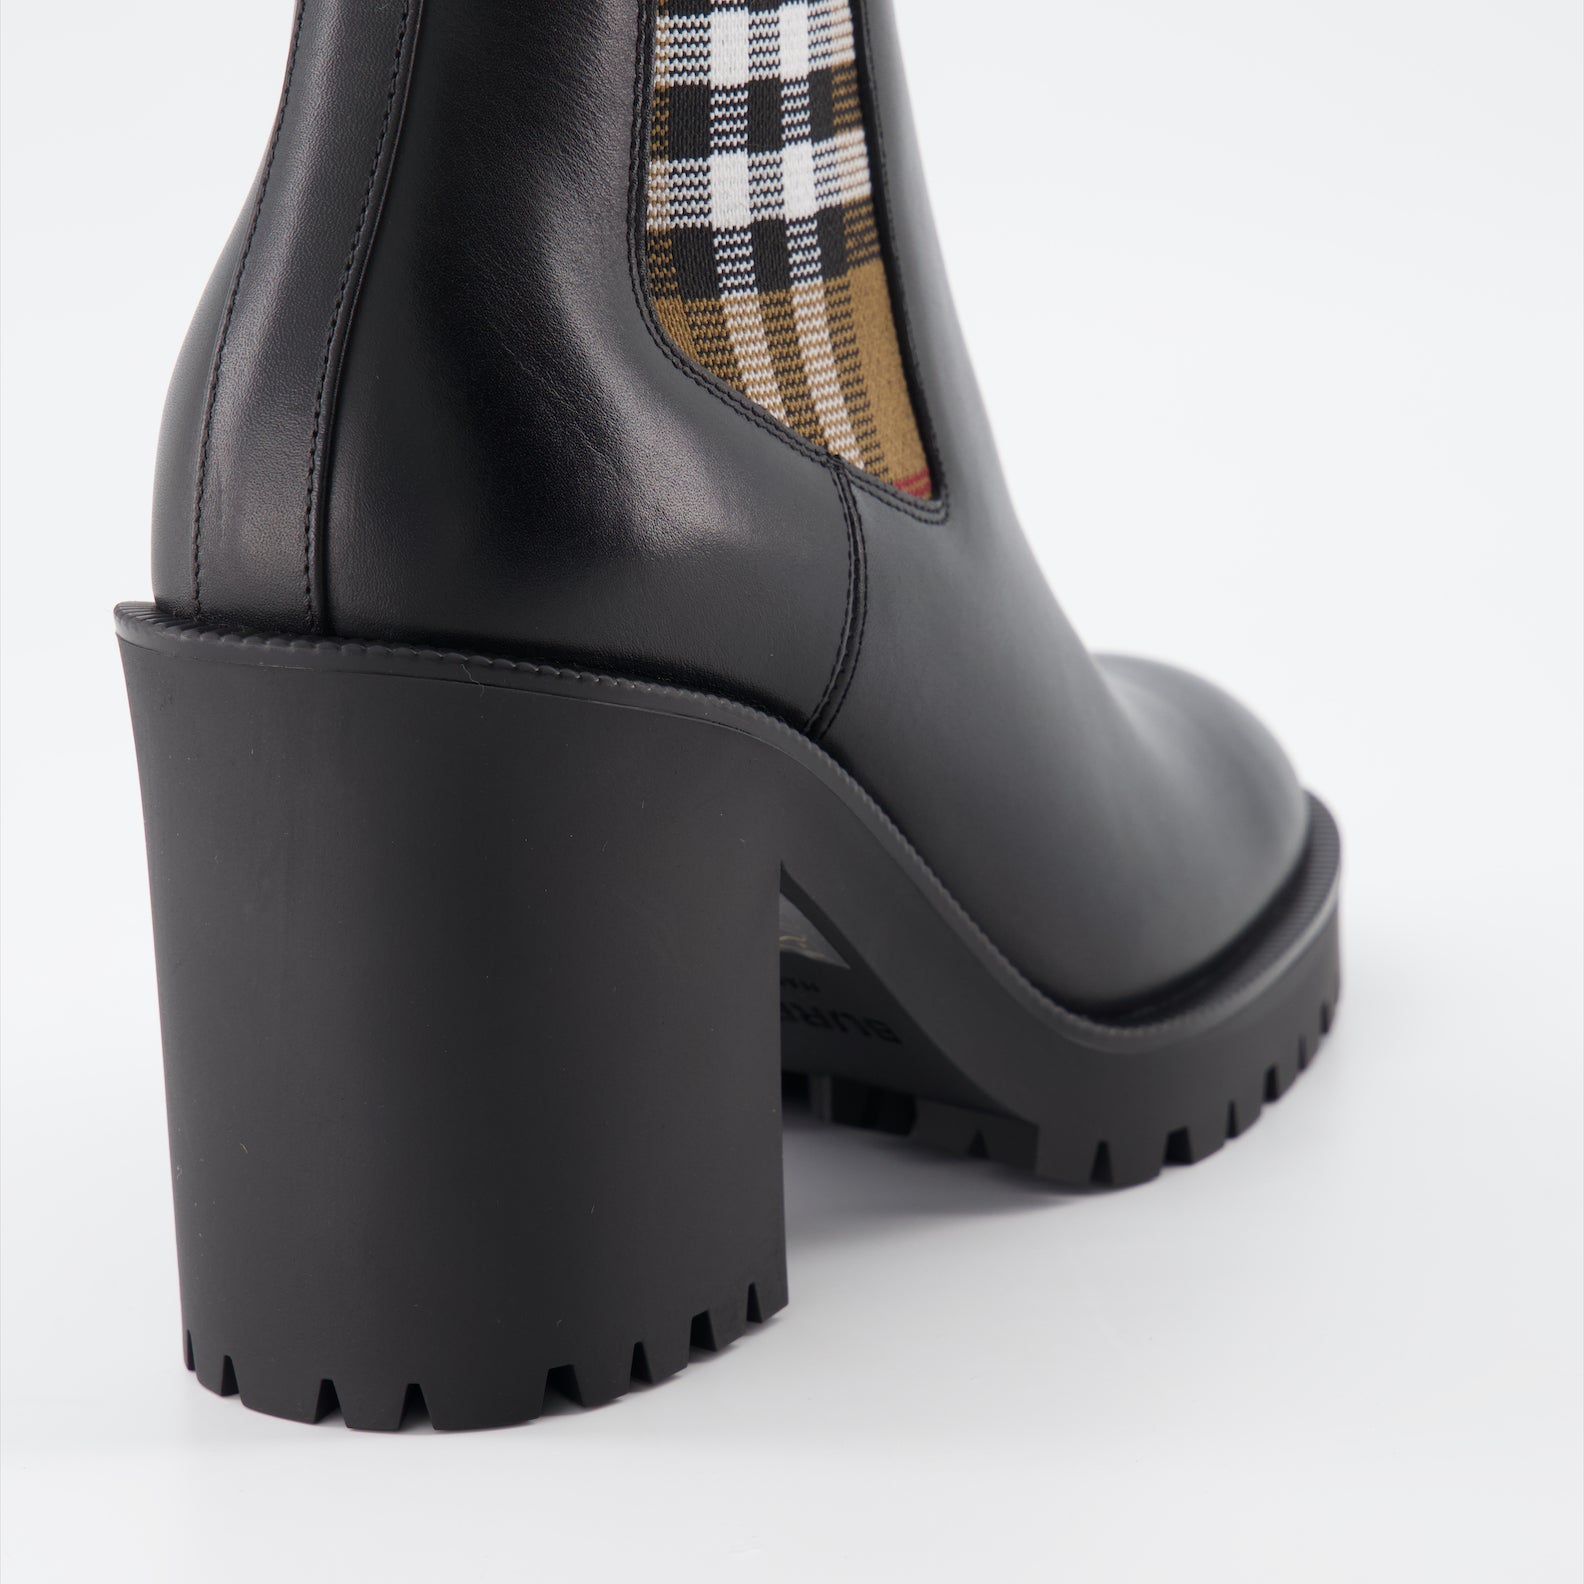 Checked leather ankle boots